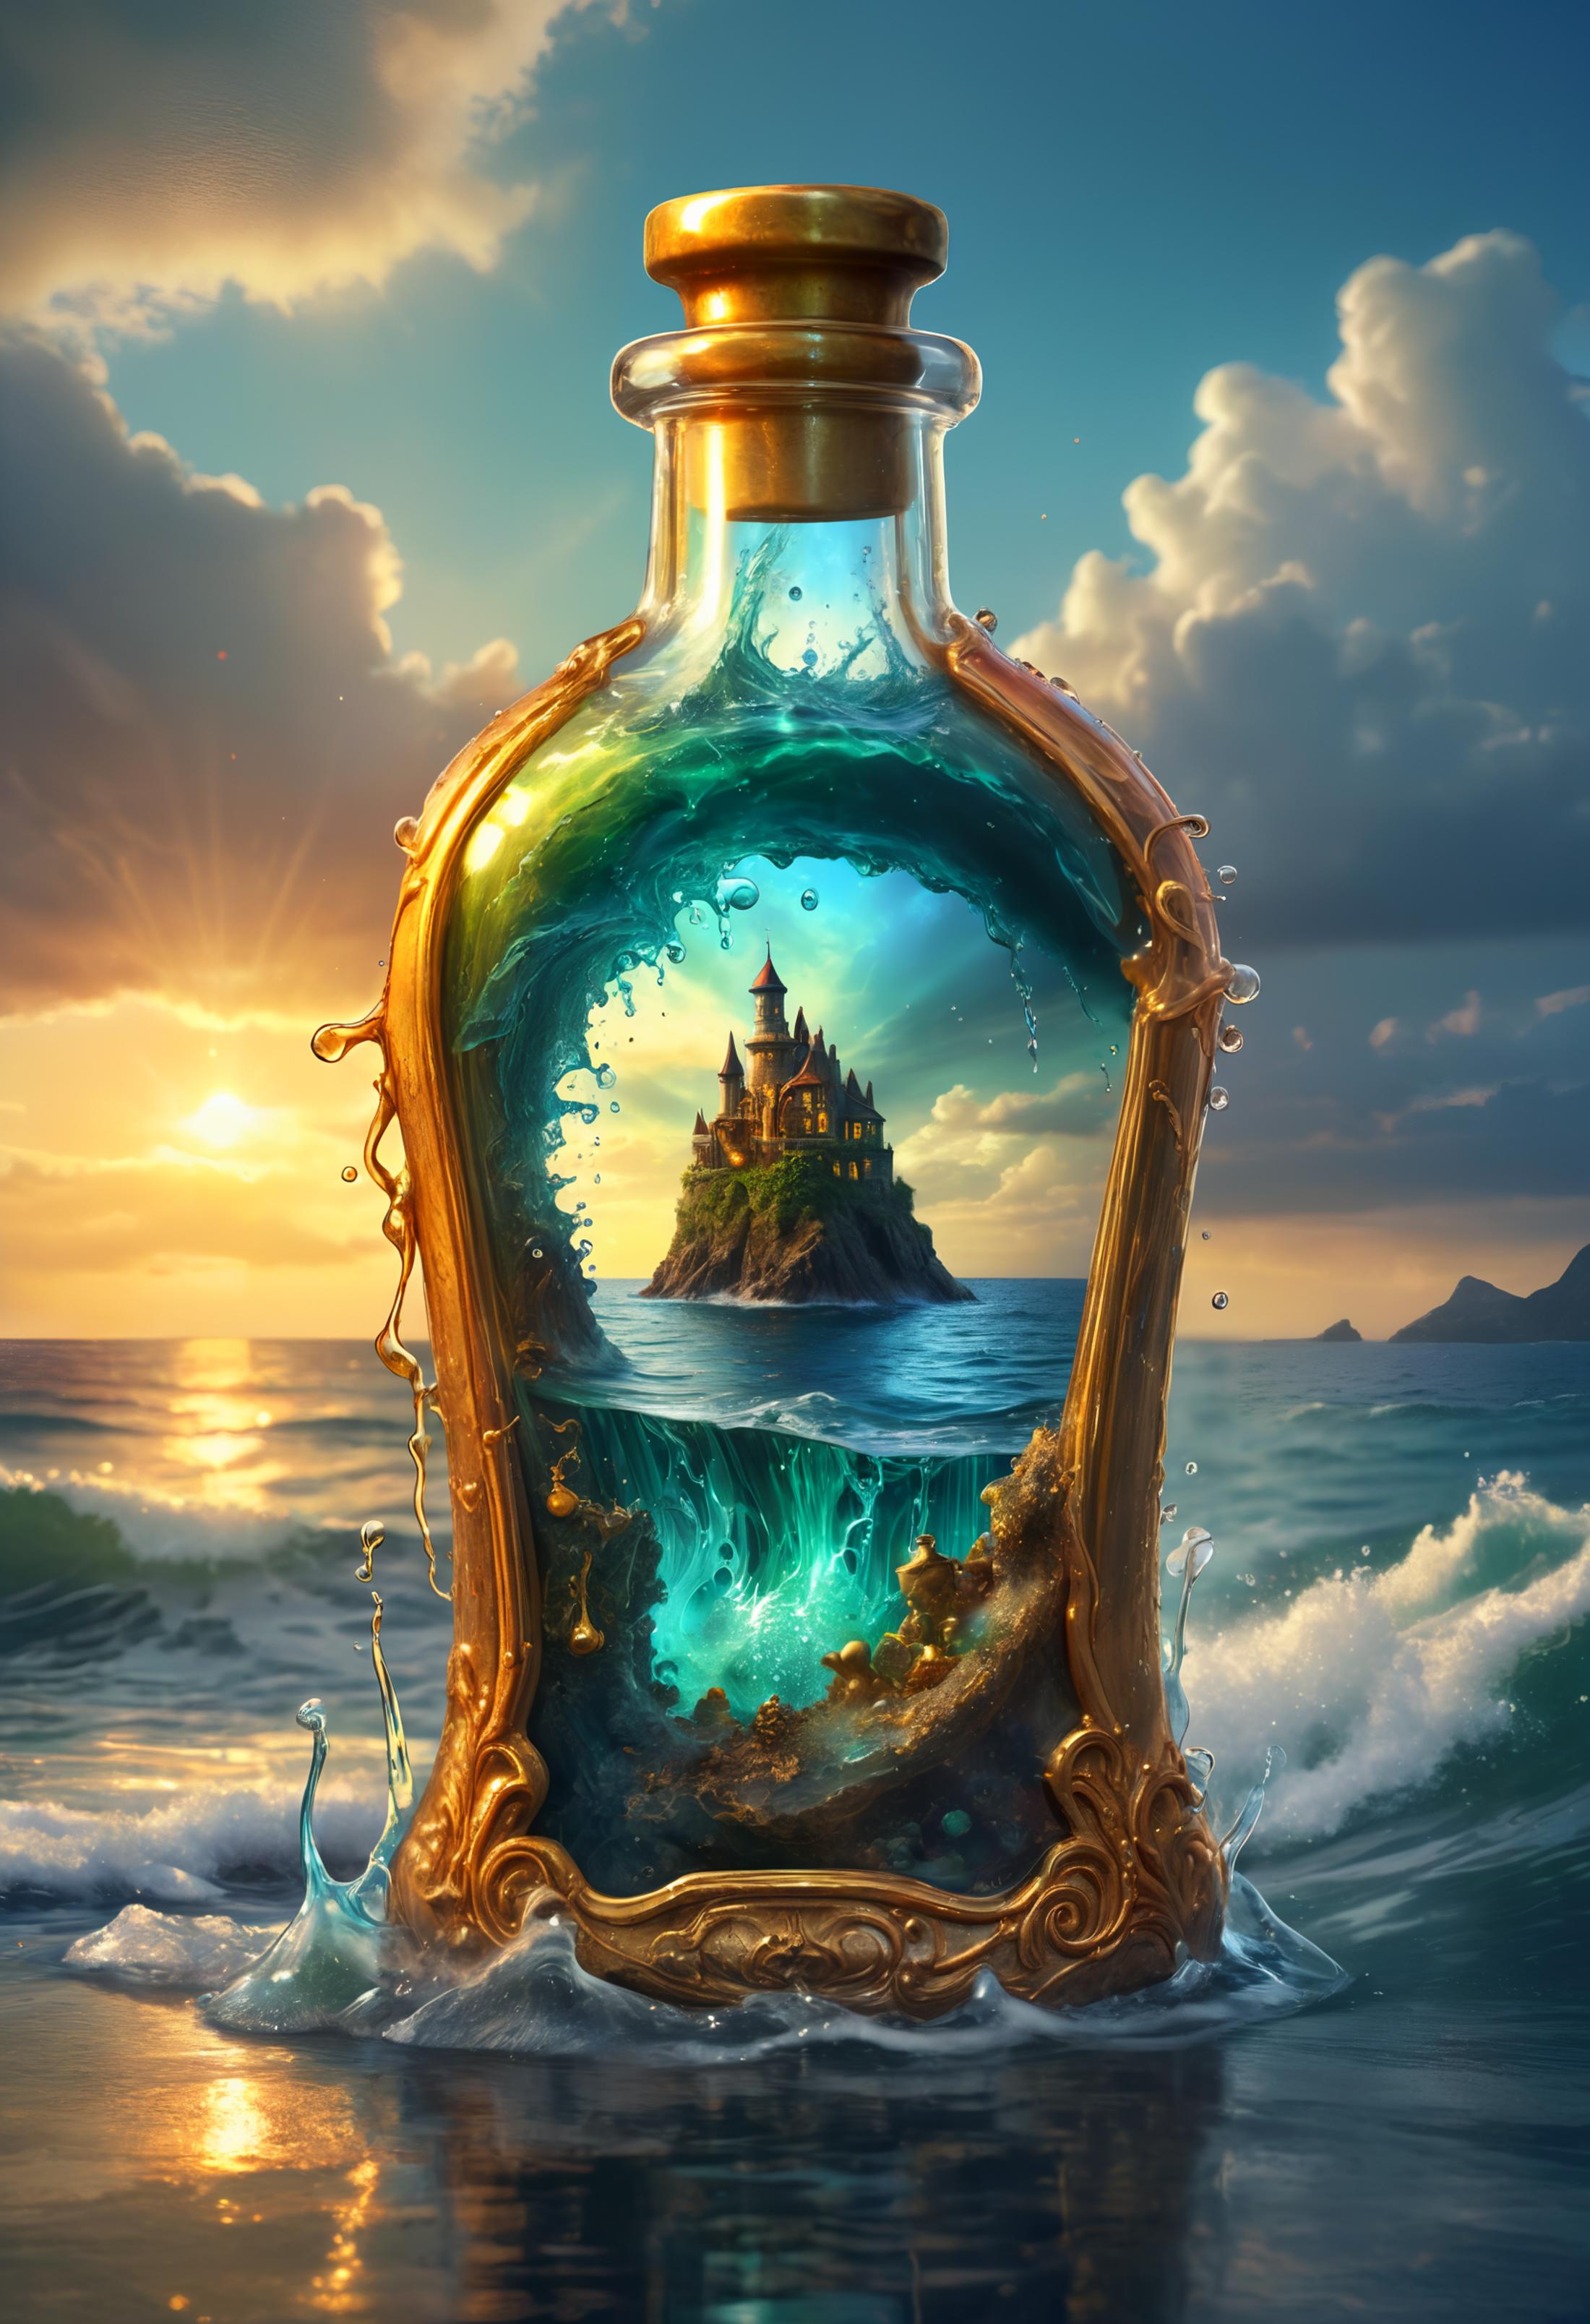 Enchanted Bottle of Water with Castle Inside - Magical Art